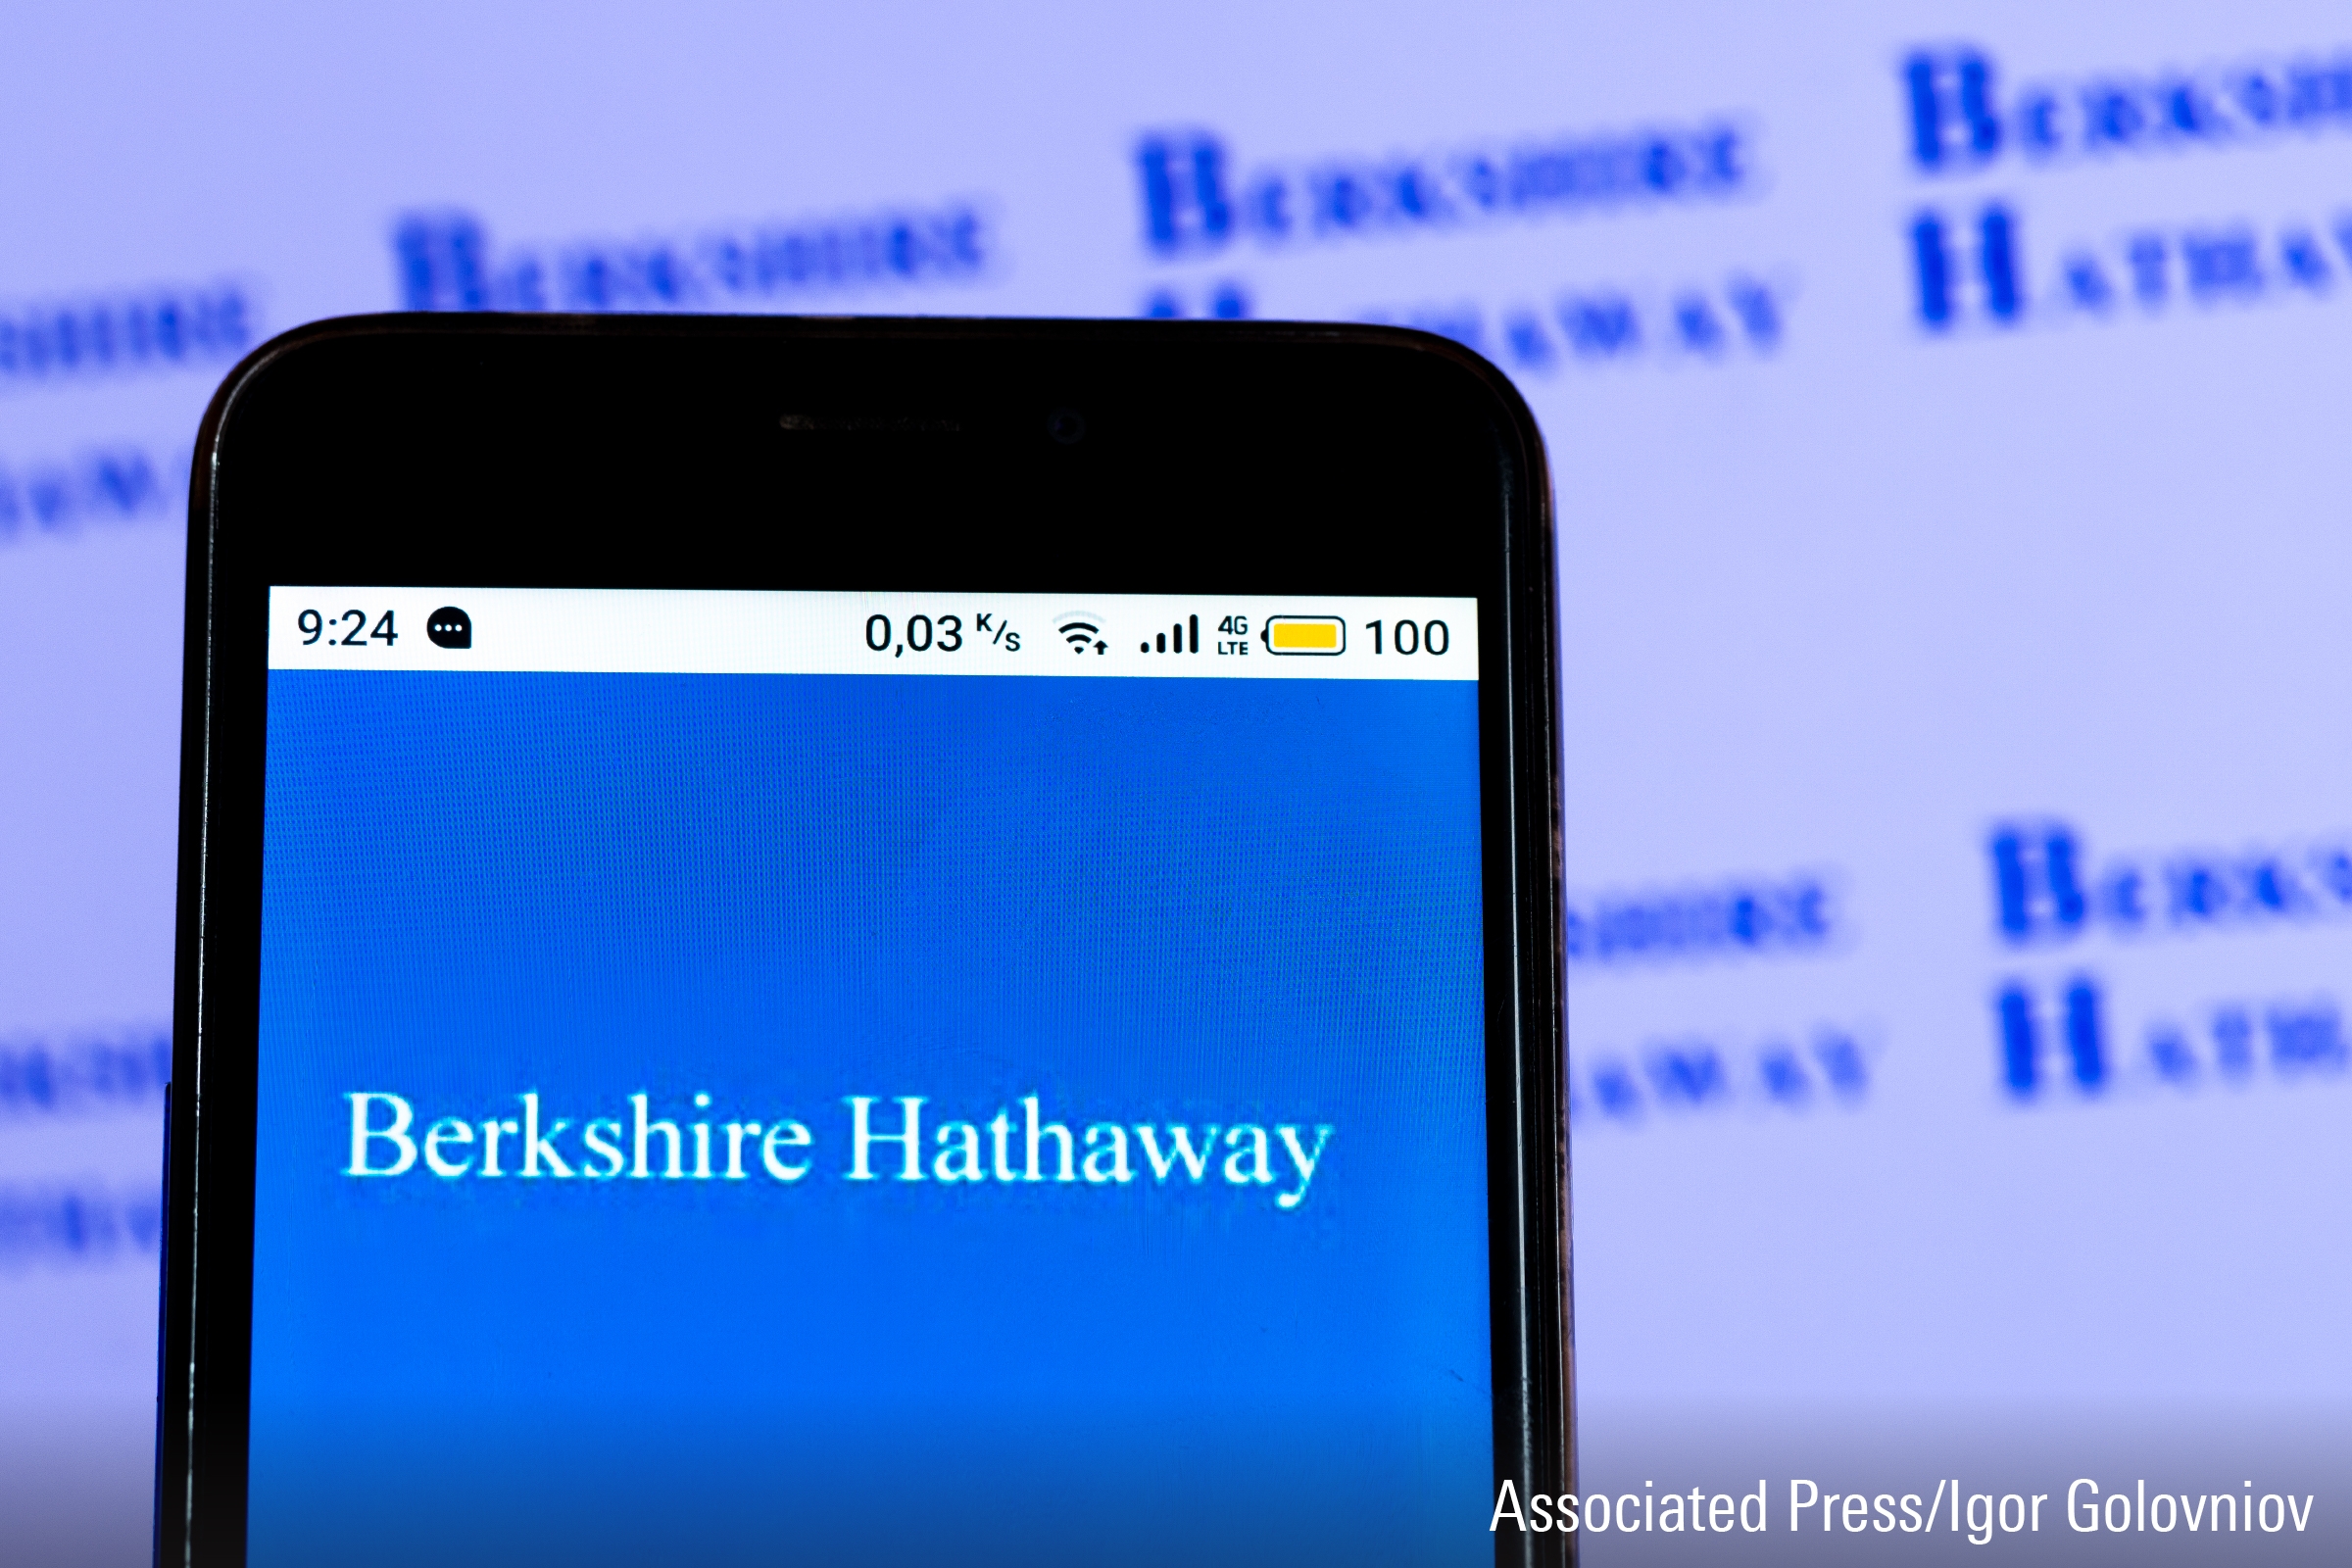 Berkshire Hathaway Shareholders Push for Progress on Climate, Workplace Diversity